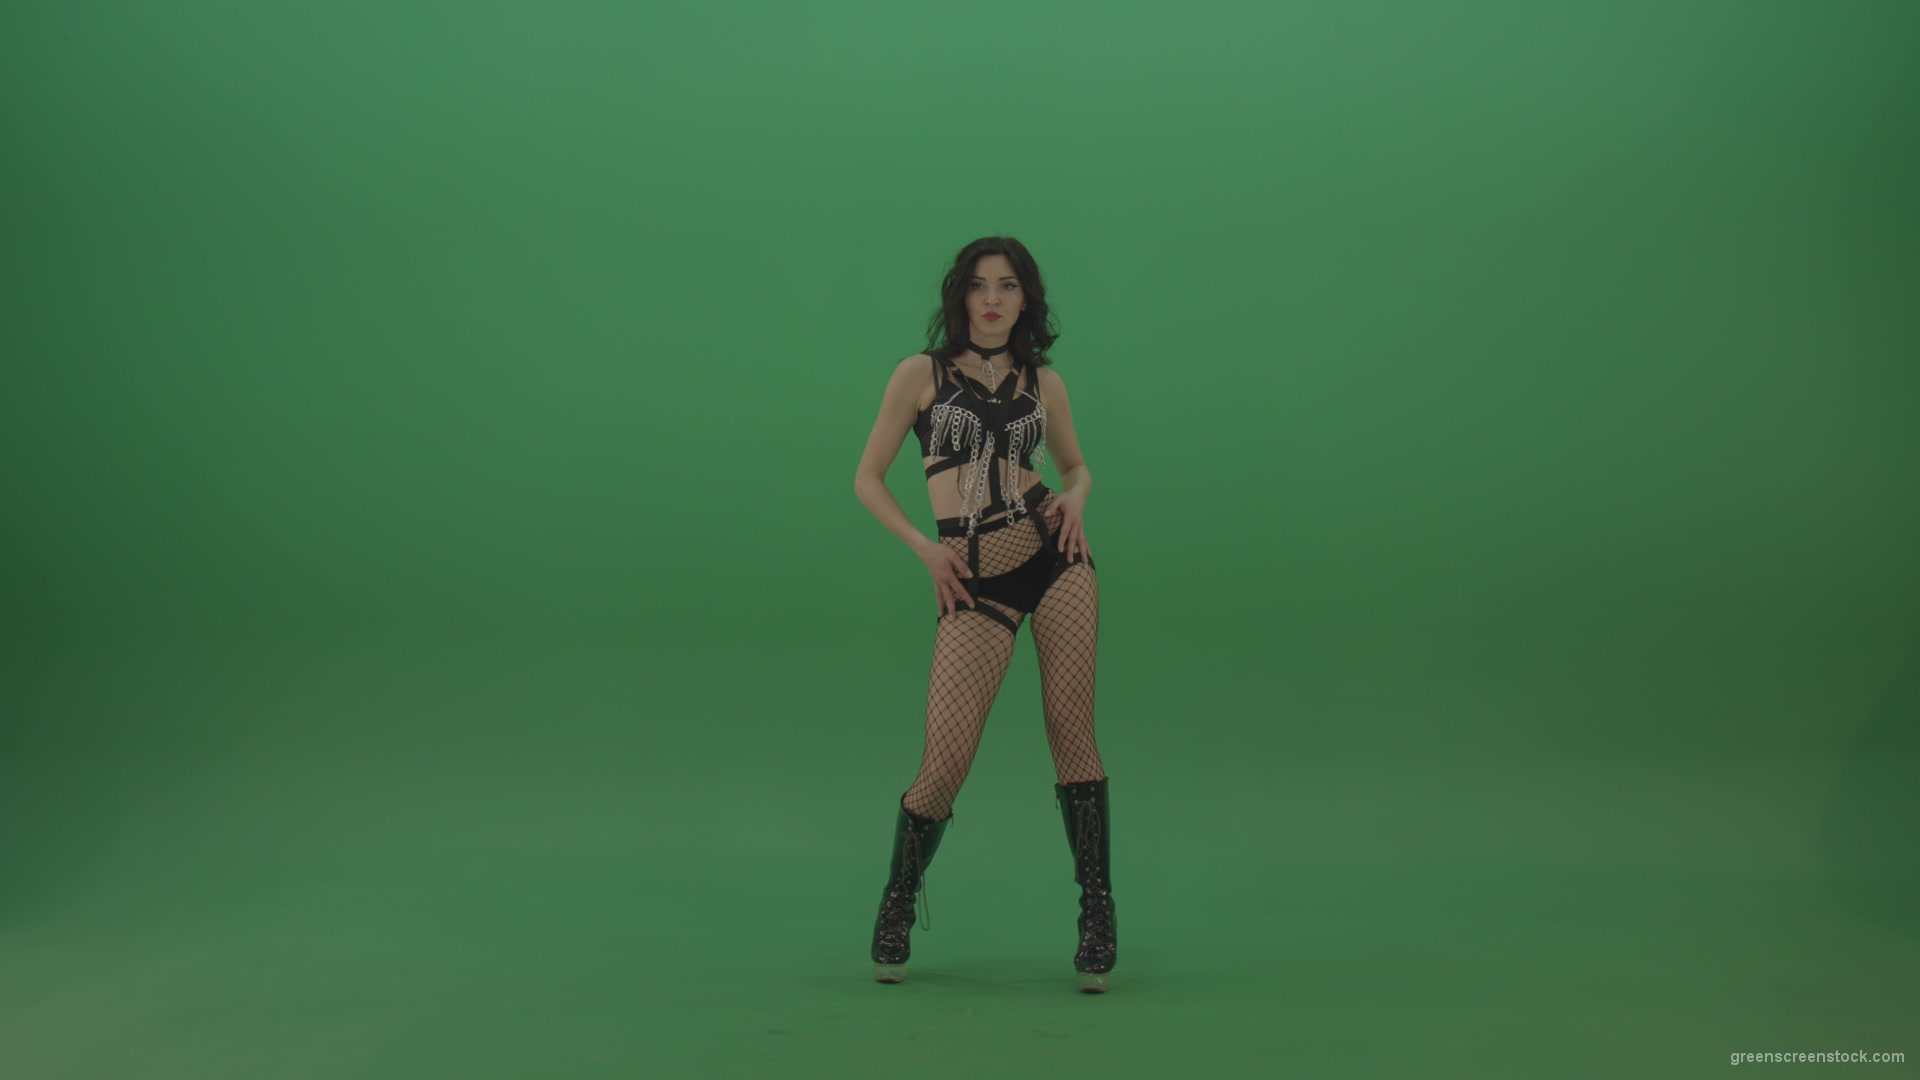 Pretty-black-haired-woman-in-an-erotic-suit-cycles-repetitive-movements-on-green-background._001 Green Screen Stock